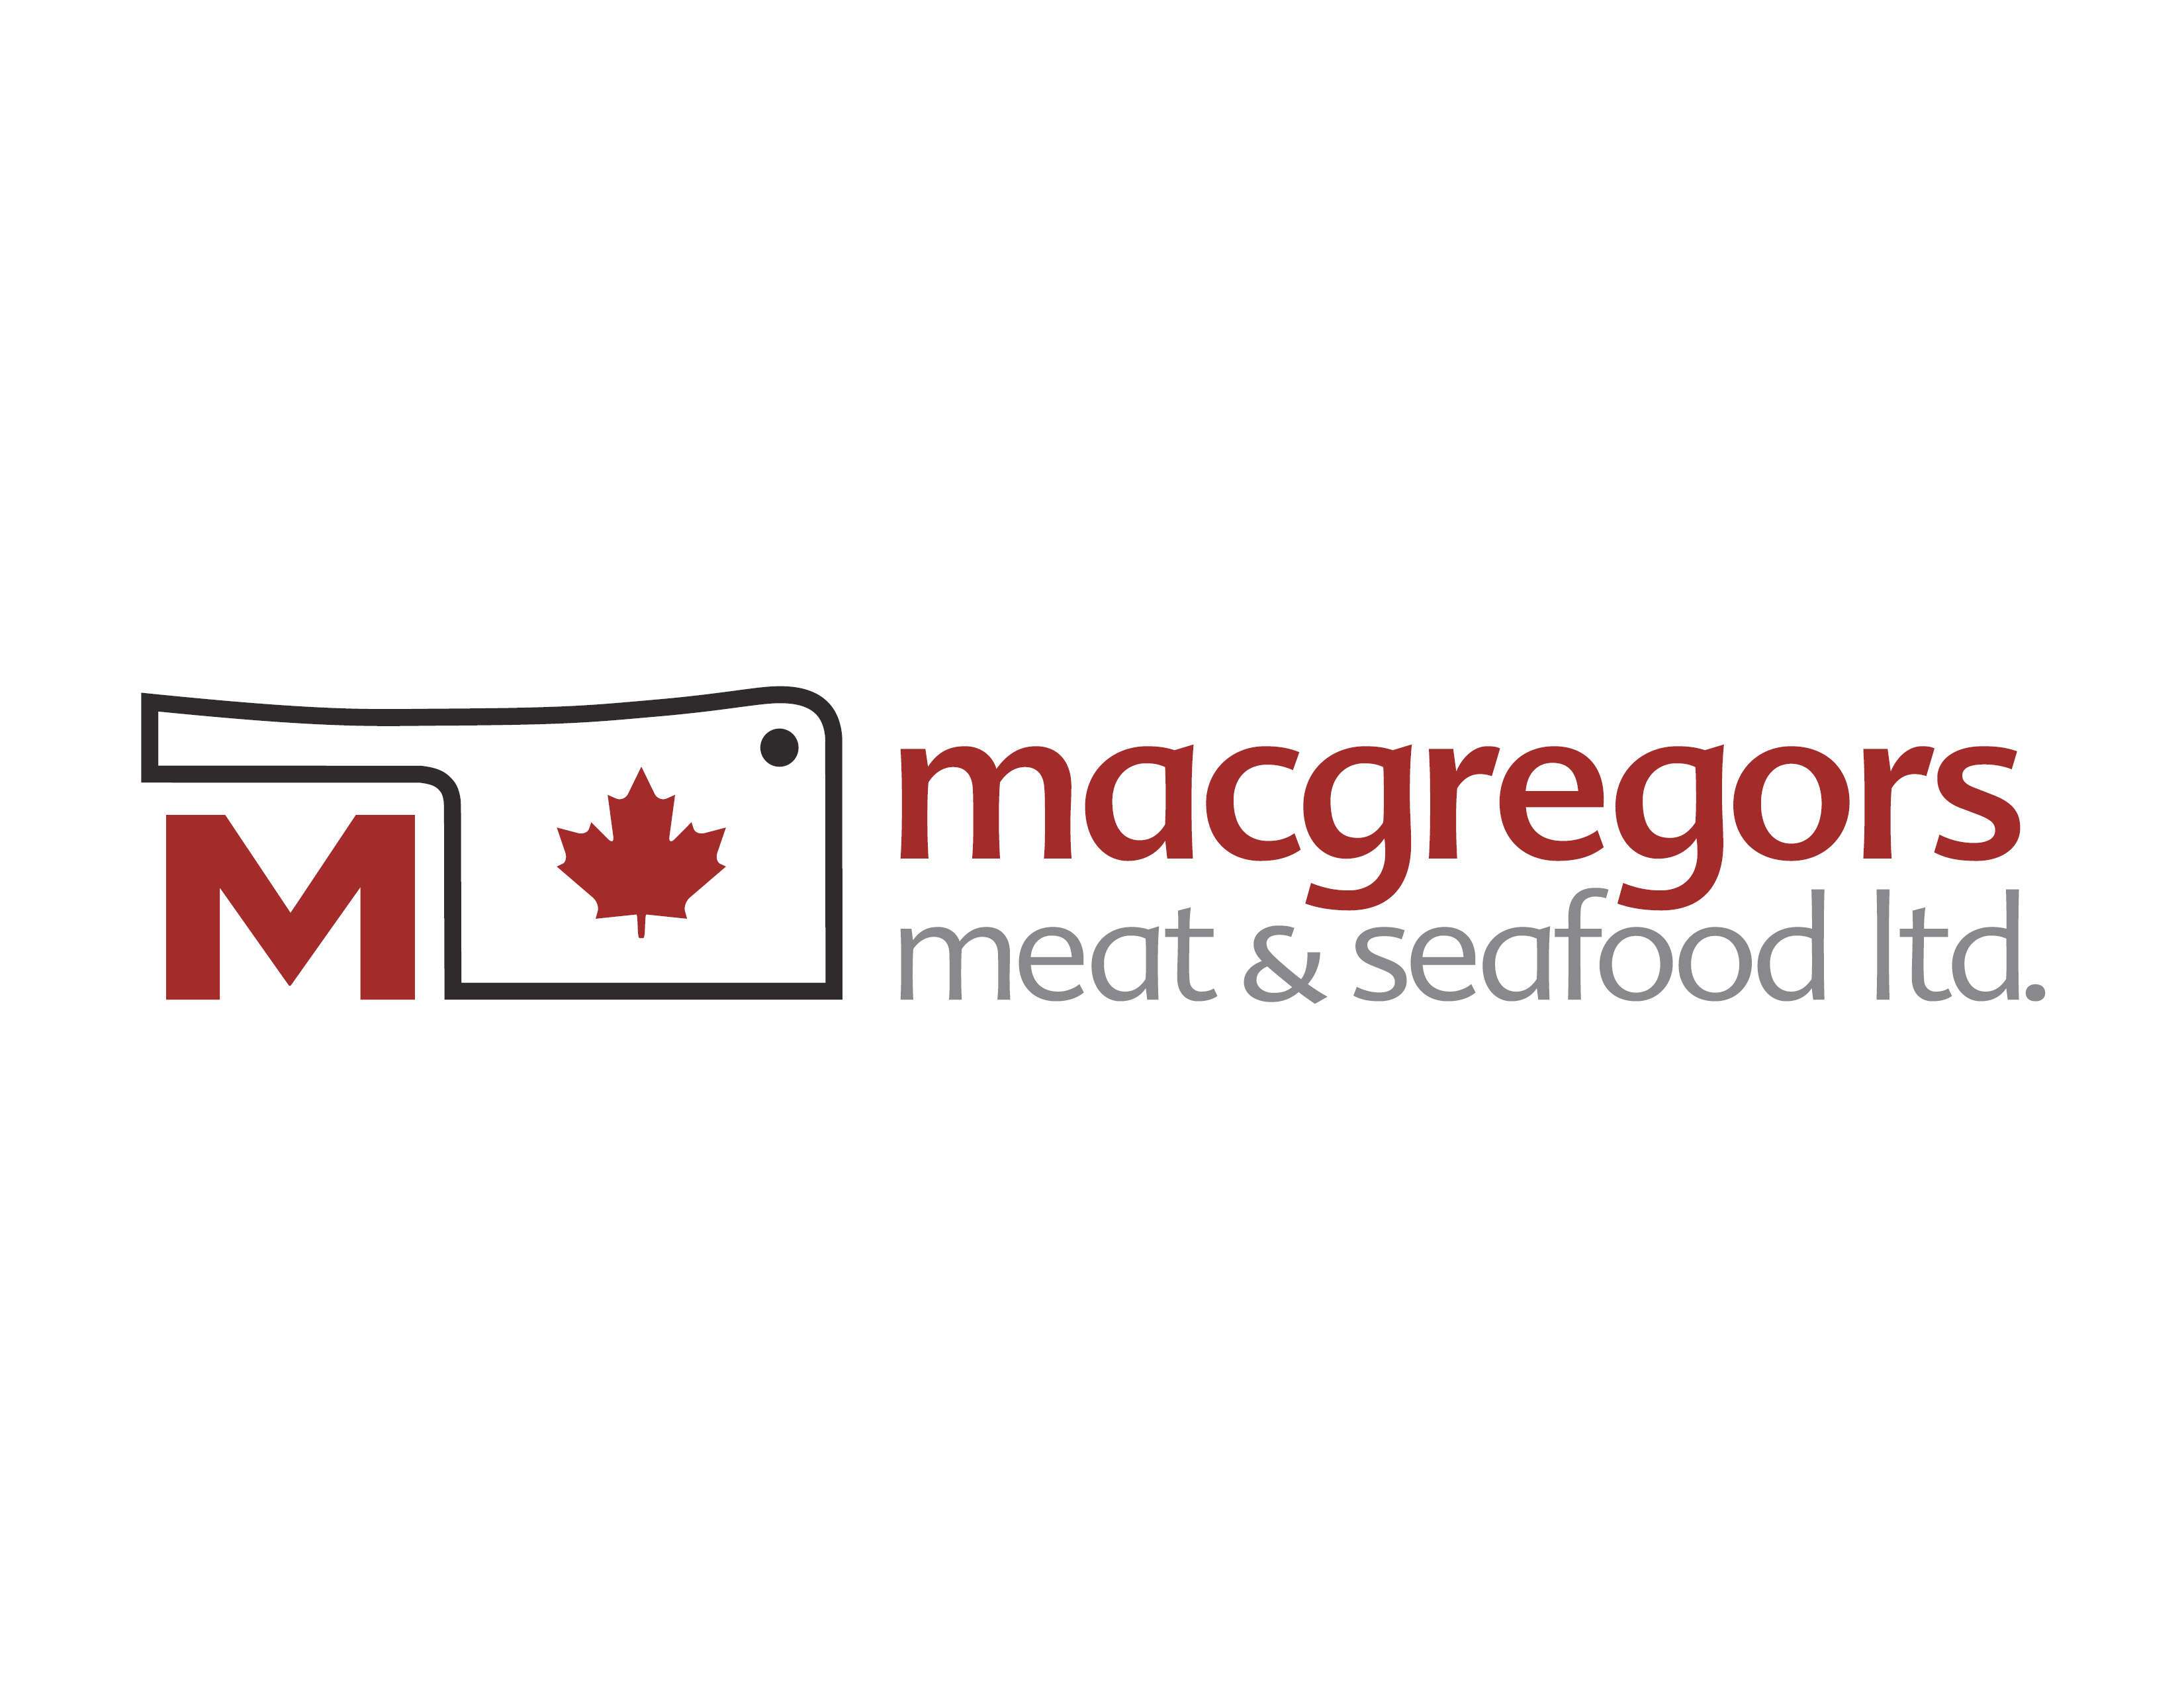 MacGregors Meat & Seafood